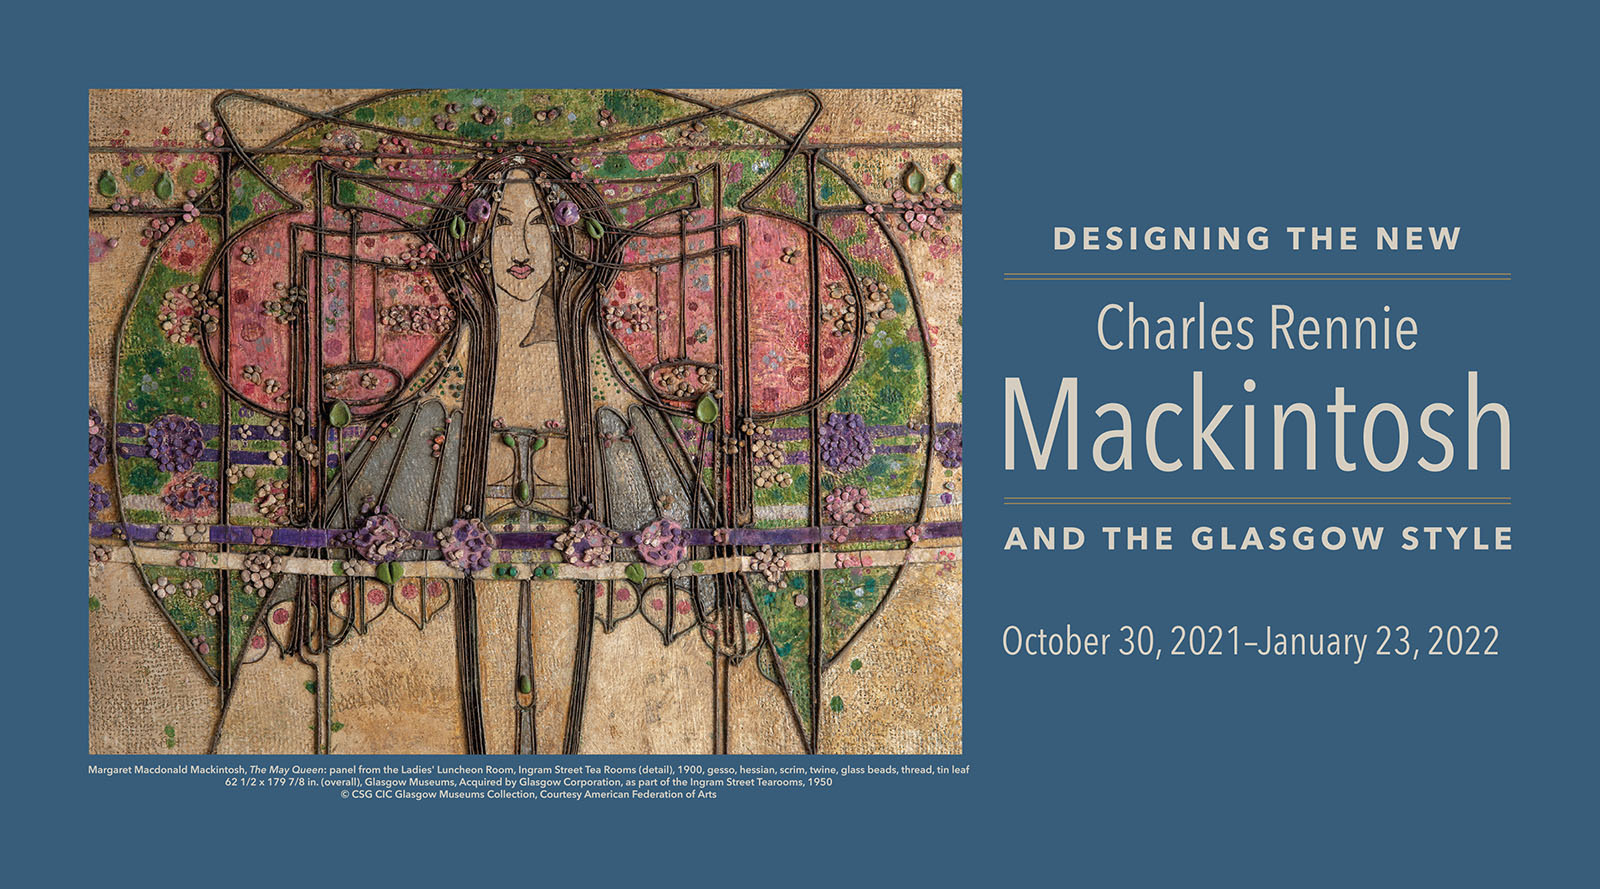 Designing the New: Charles Rennie Mackintosh and the Glasgow Style banner